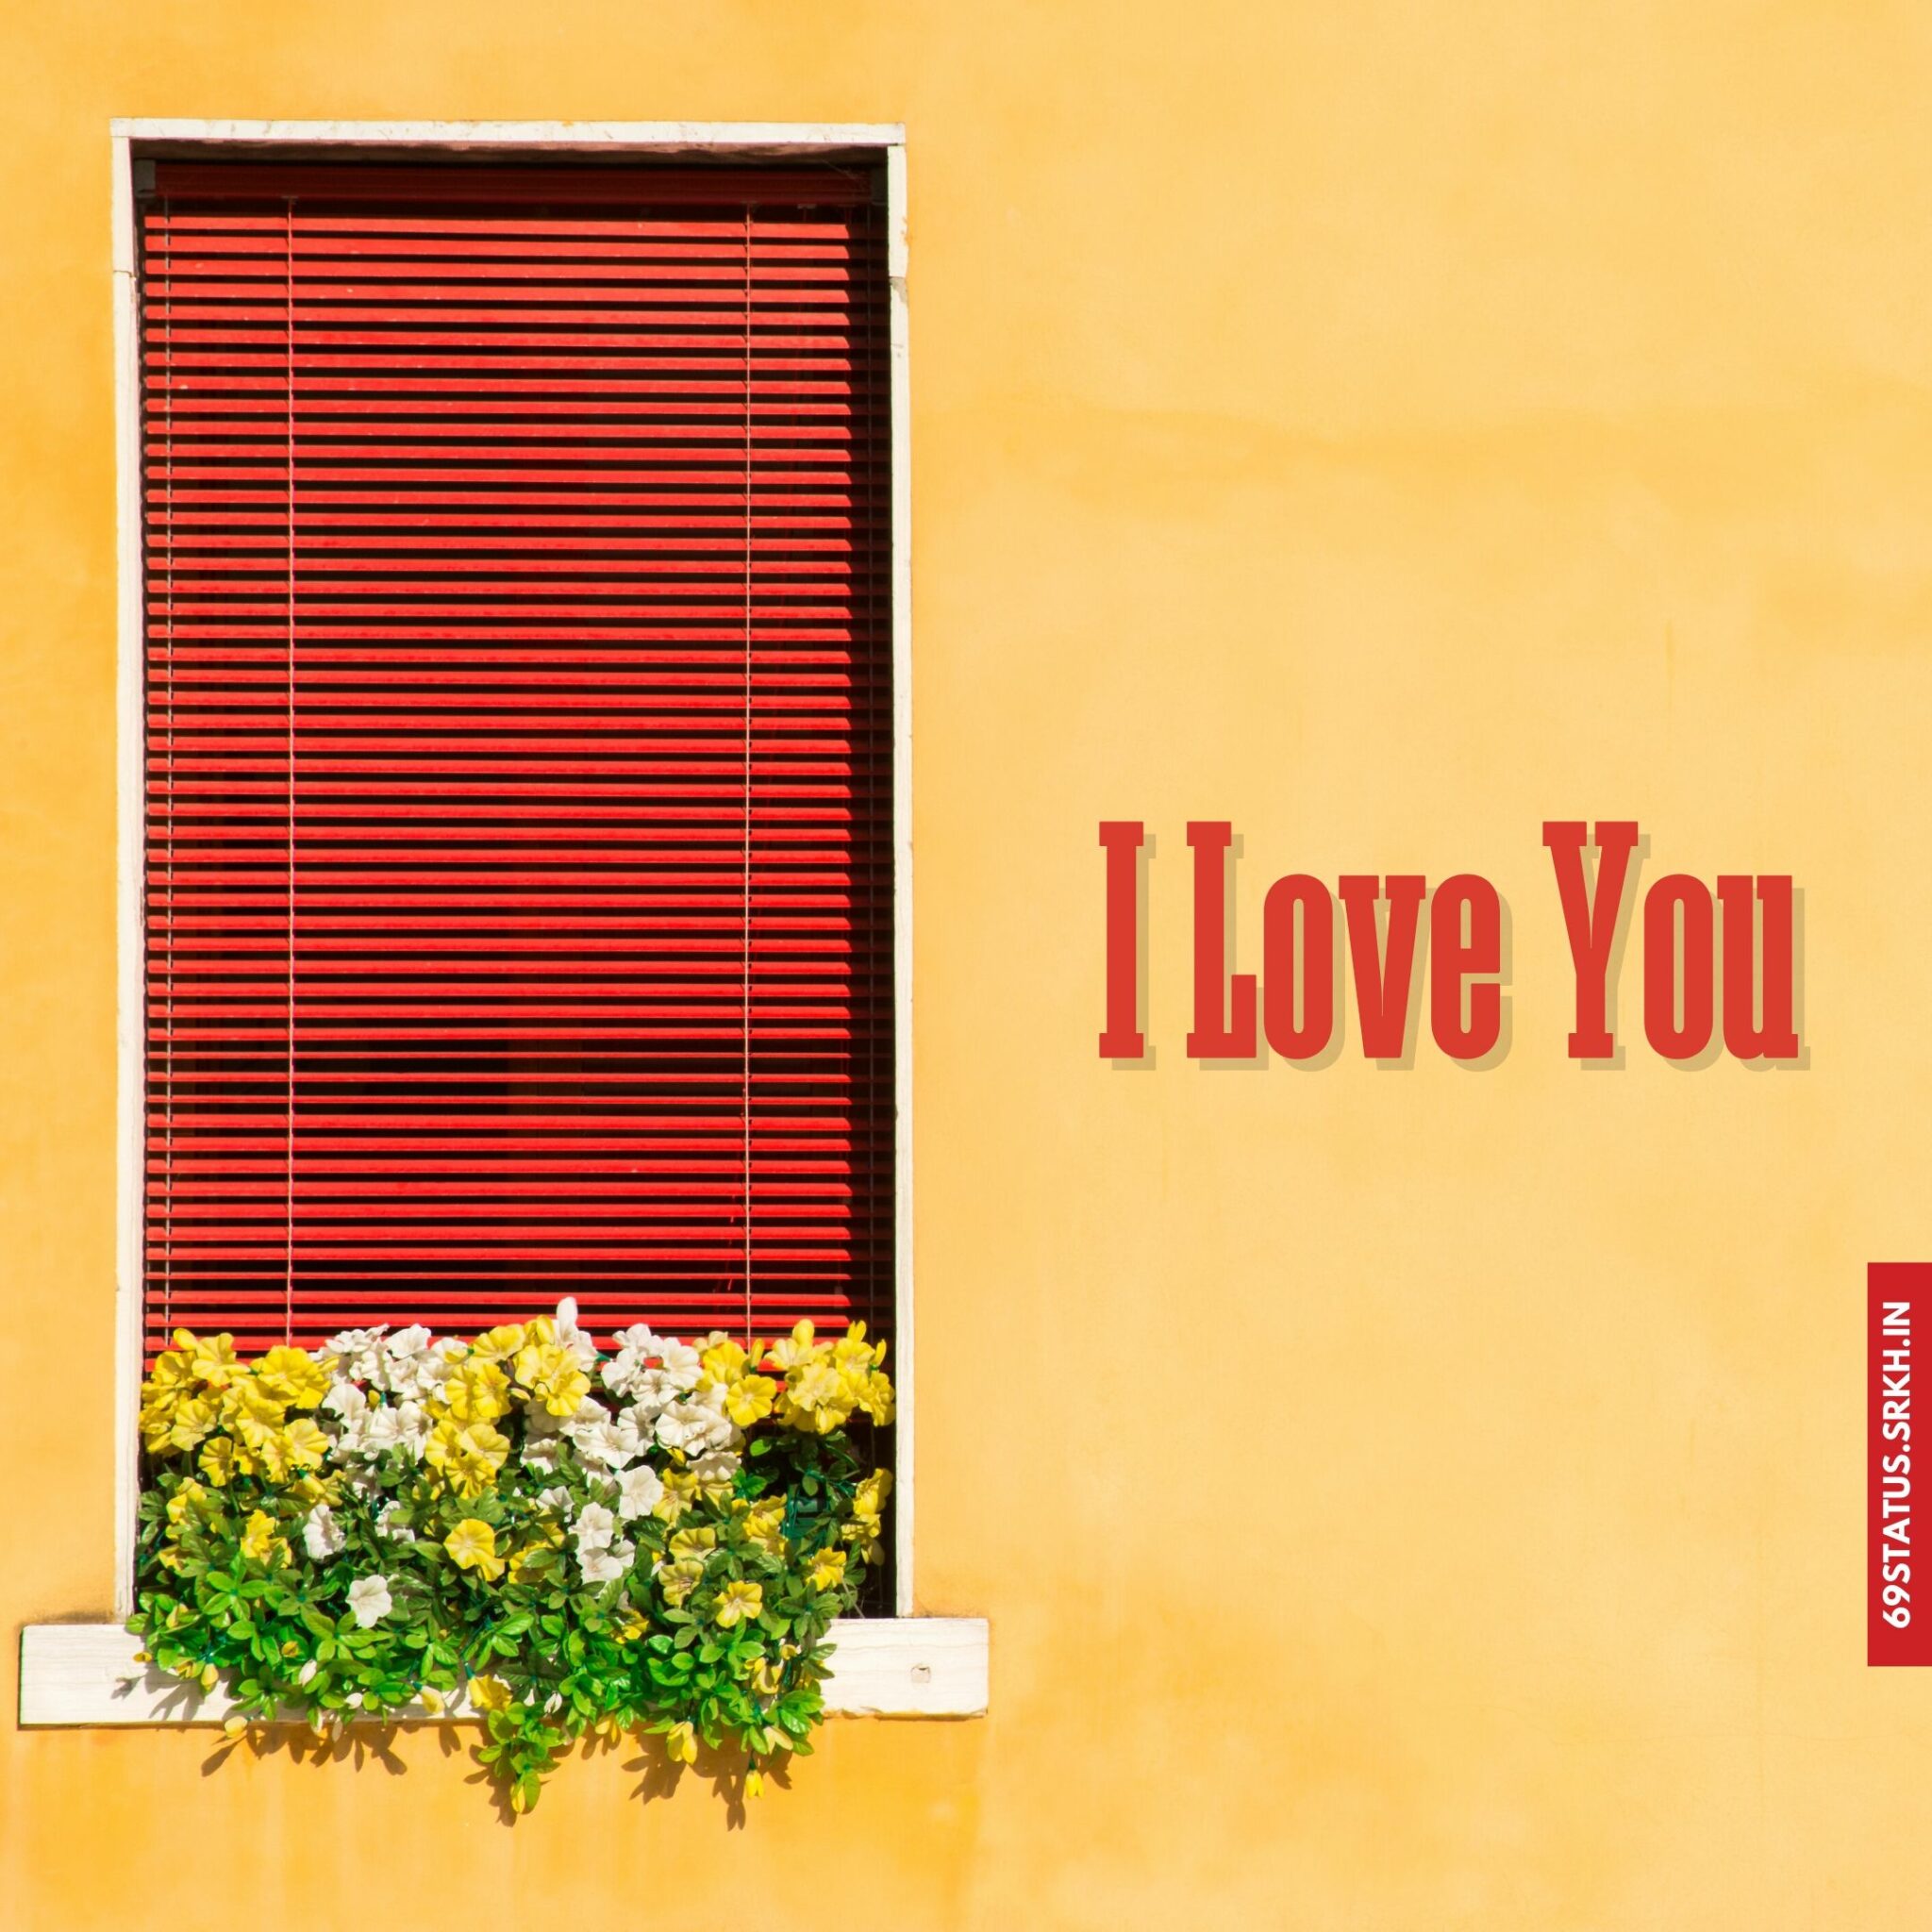 I Love You flowers images hd